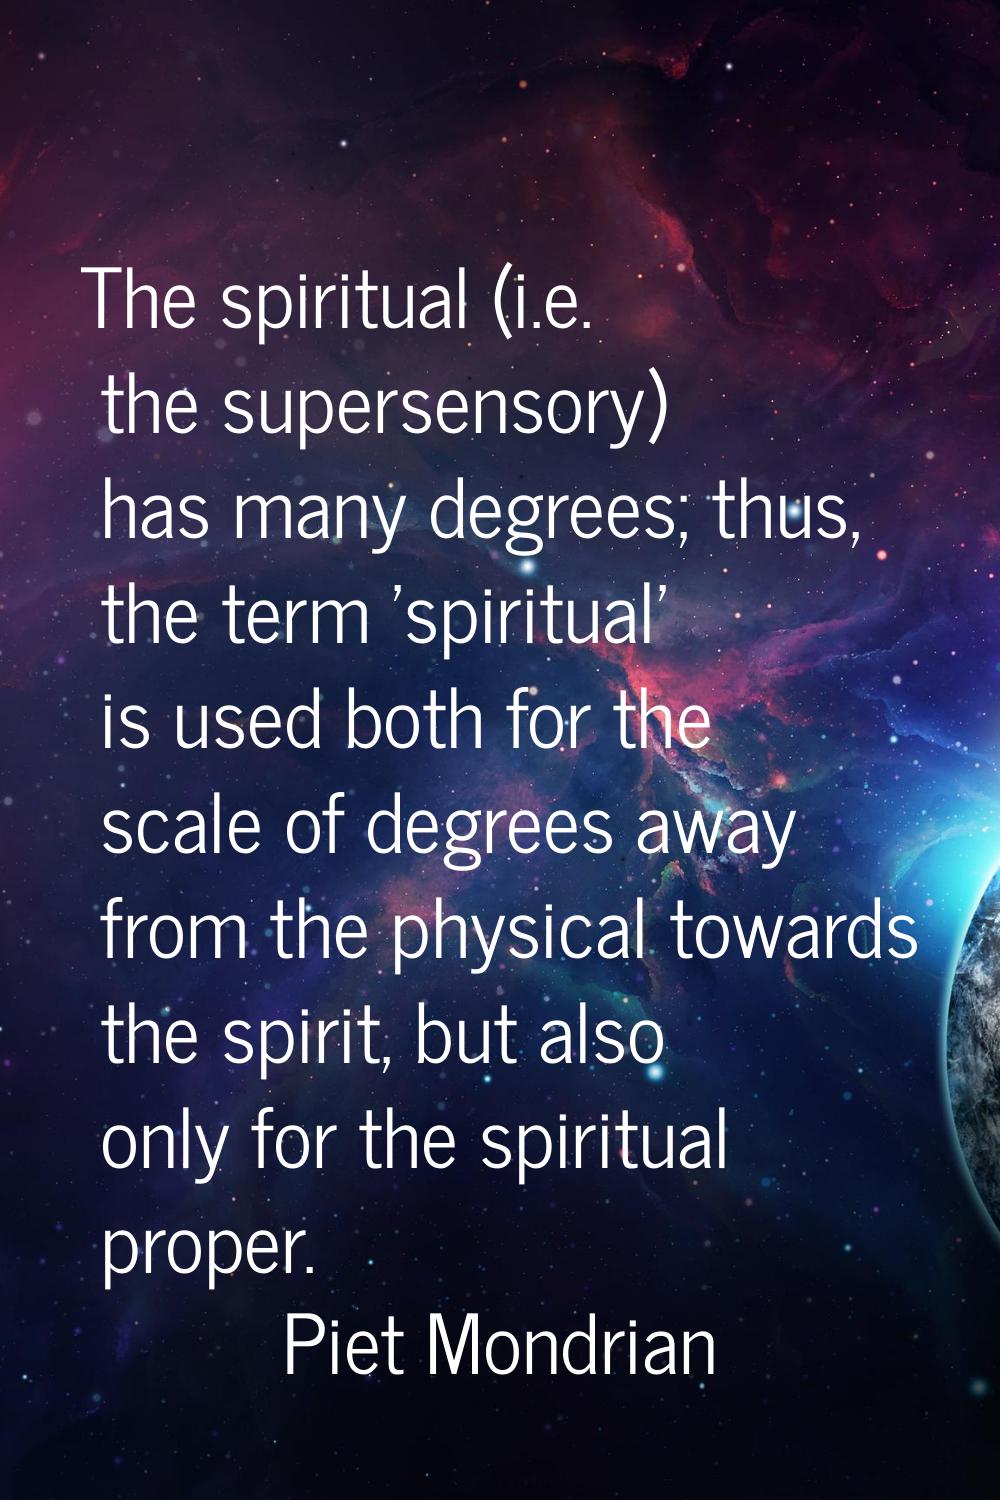 The spiritual (i.e. the supersensory) has many degrees; thus, the term 'spiritual' is used both for